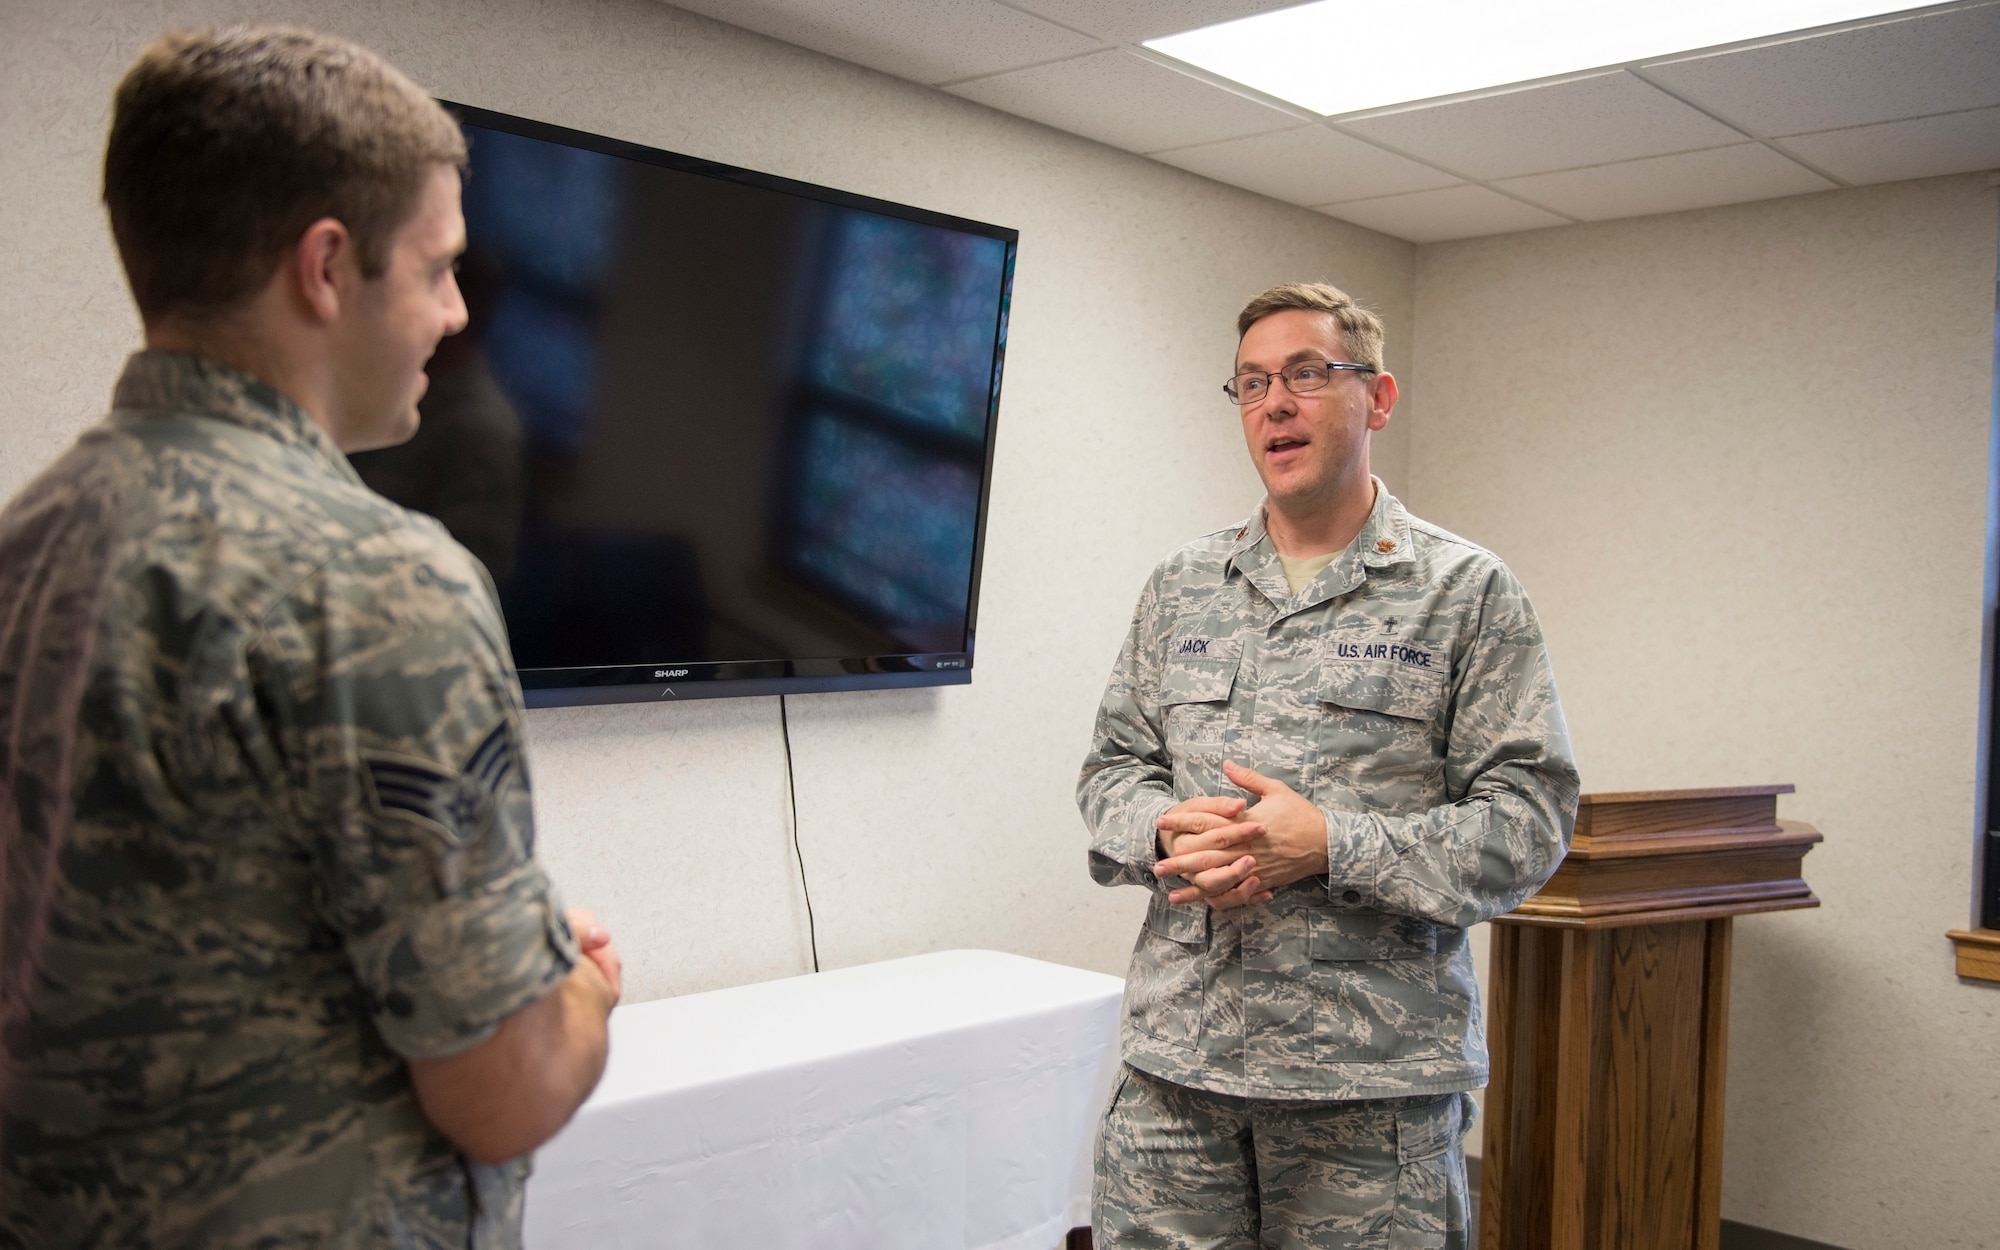 Chaplain (Maj.) Alex jack, 434th Air Refueling Wing chaplain, talks with Senior Airman Jeffrey Withrow, 434th Air Refueling Wing public affairs specialist, in the chapel at Grissom Air Reserve Base, Ind., Aug. 20, 2018. Chaplain Jack will be hosting a Pre-Deployment Relationship Sustainment Skills class here Sept. 9, 2018. (U.S. Air Force photo/Staff Sgt. Jami K. Lancette)